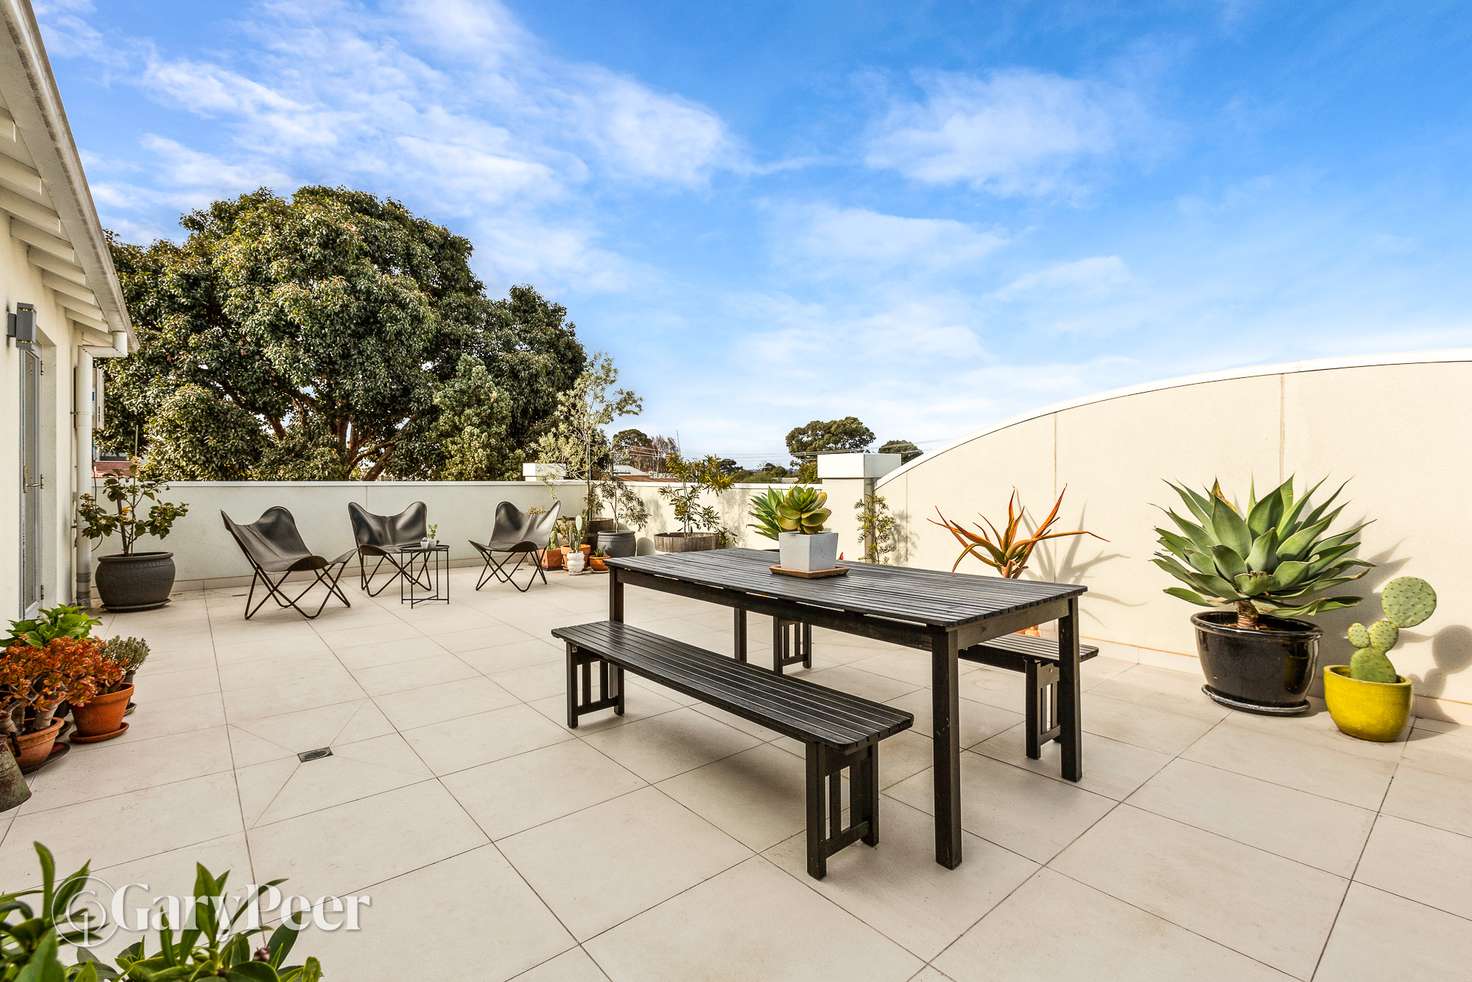 Main view of Homely apartment listing, 15/51 Murrumbeena Road, Murrumbeena VIC 3163